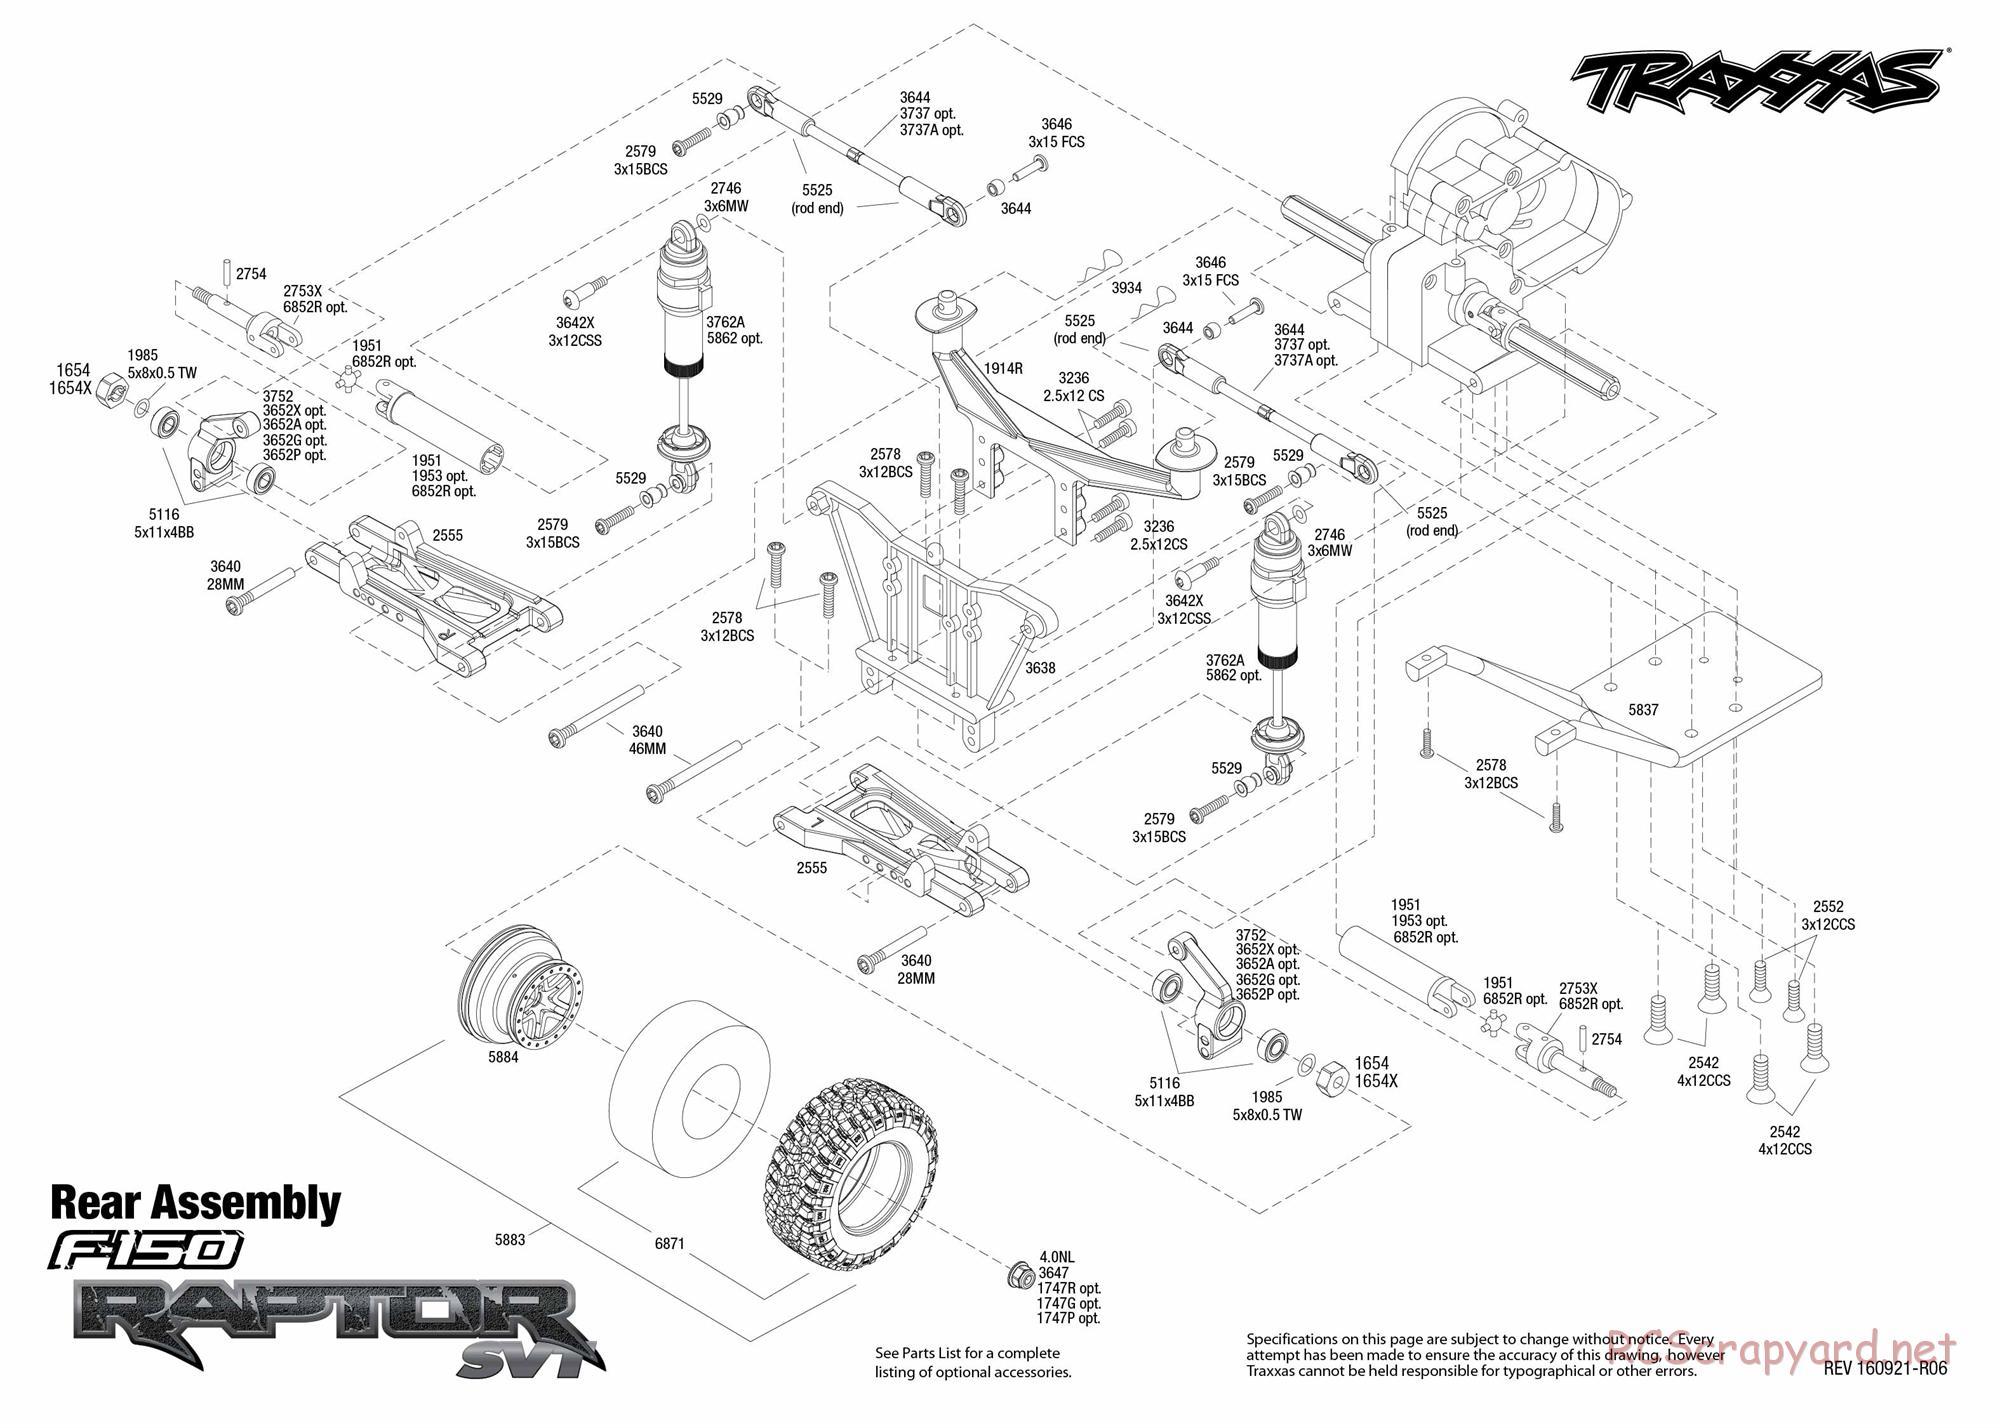 Traxxas - Ford F-150 SVT Raptor (2015) - Exploded Views - Page 3